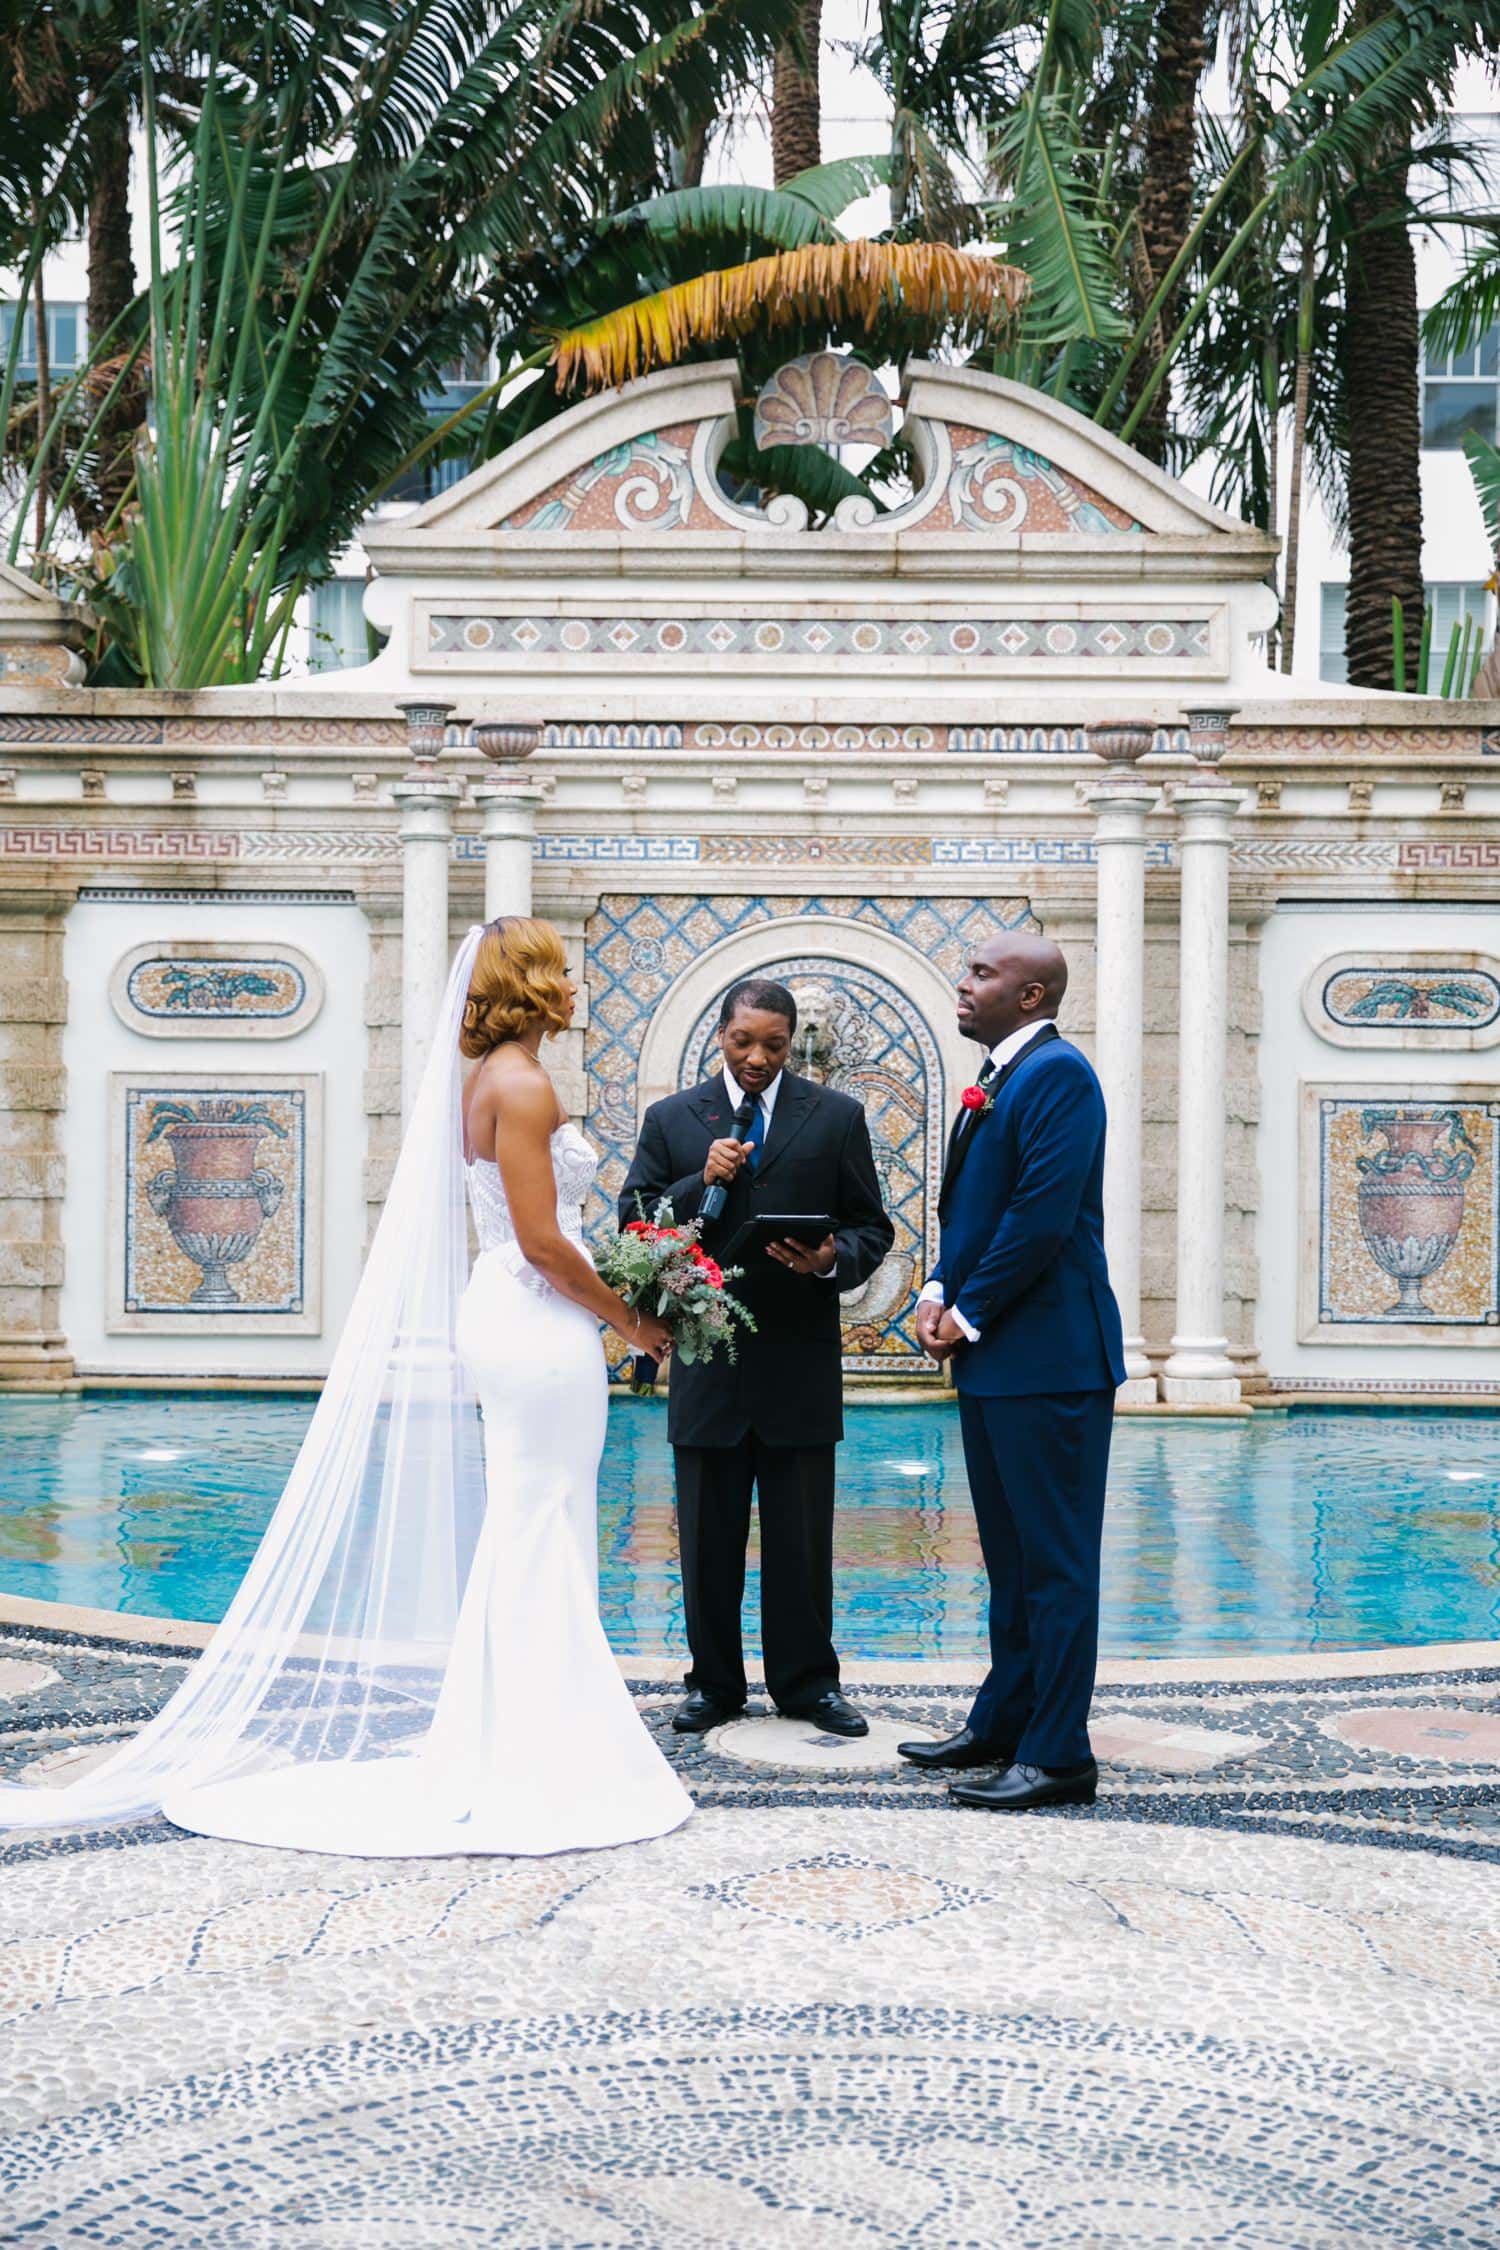 Wedding Ceremony at the Iconic Versace Mansion